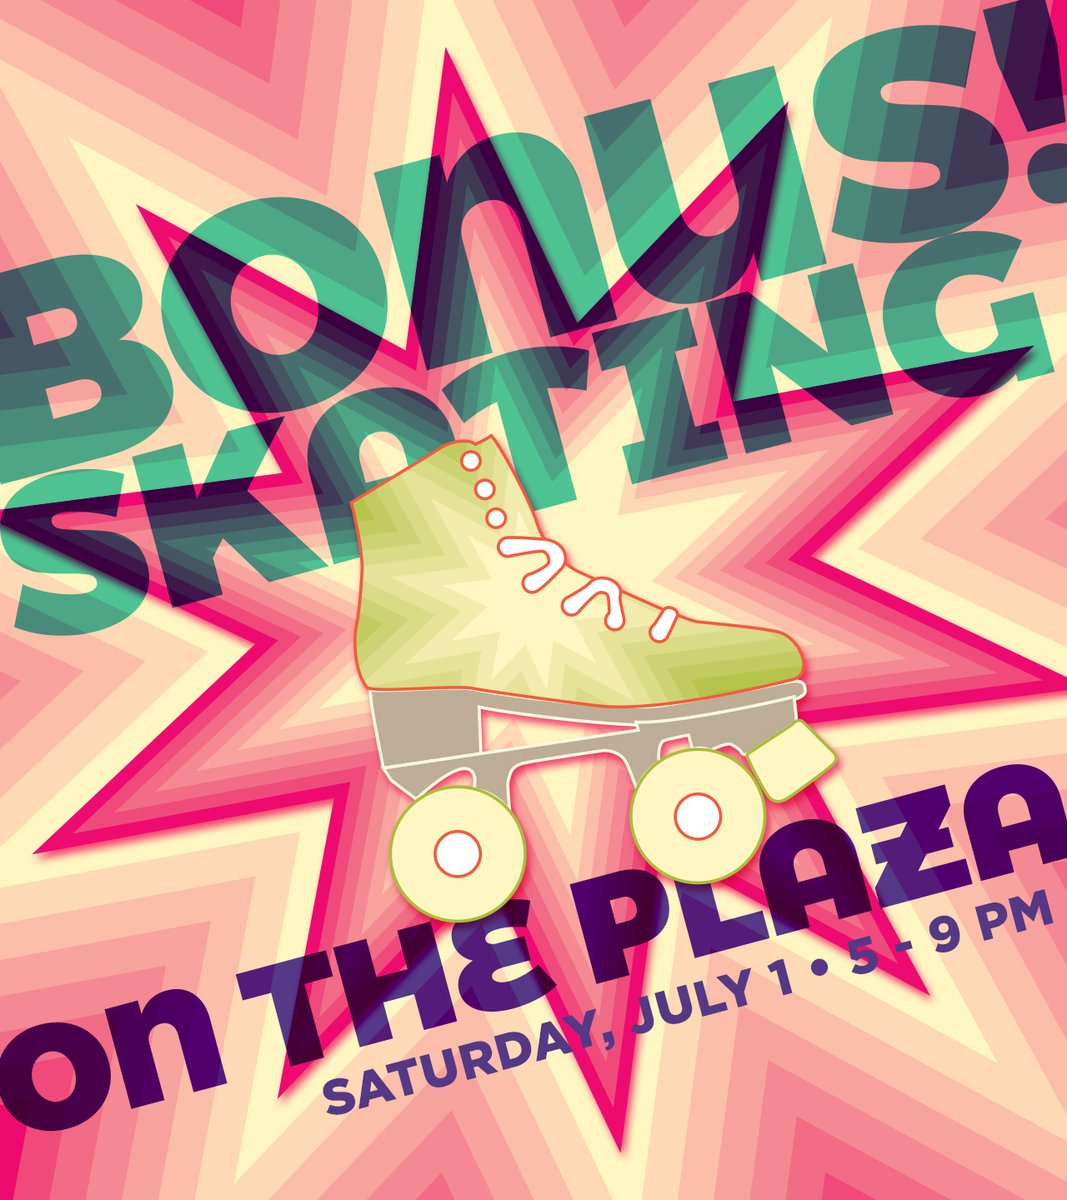 BONUS! SKATING! ON THE PLAZA!
This Saturday, July 1, from 5 - 9 pm, smack dab in the middle of Rib, White & Blue Fest action. Skates are just $2 to rent, plus festival food nearby & beverages available for purchase on-site. #letsSkate #downtownAkron #weekendFun